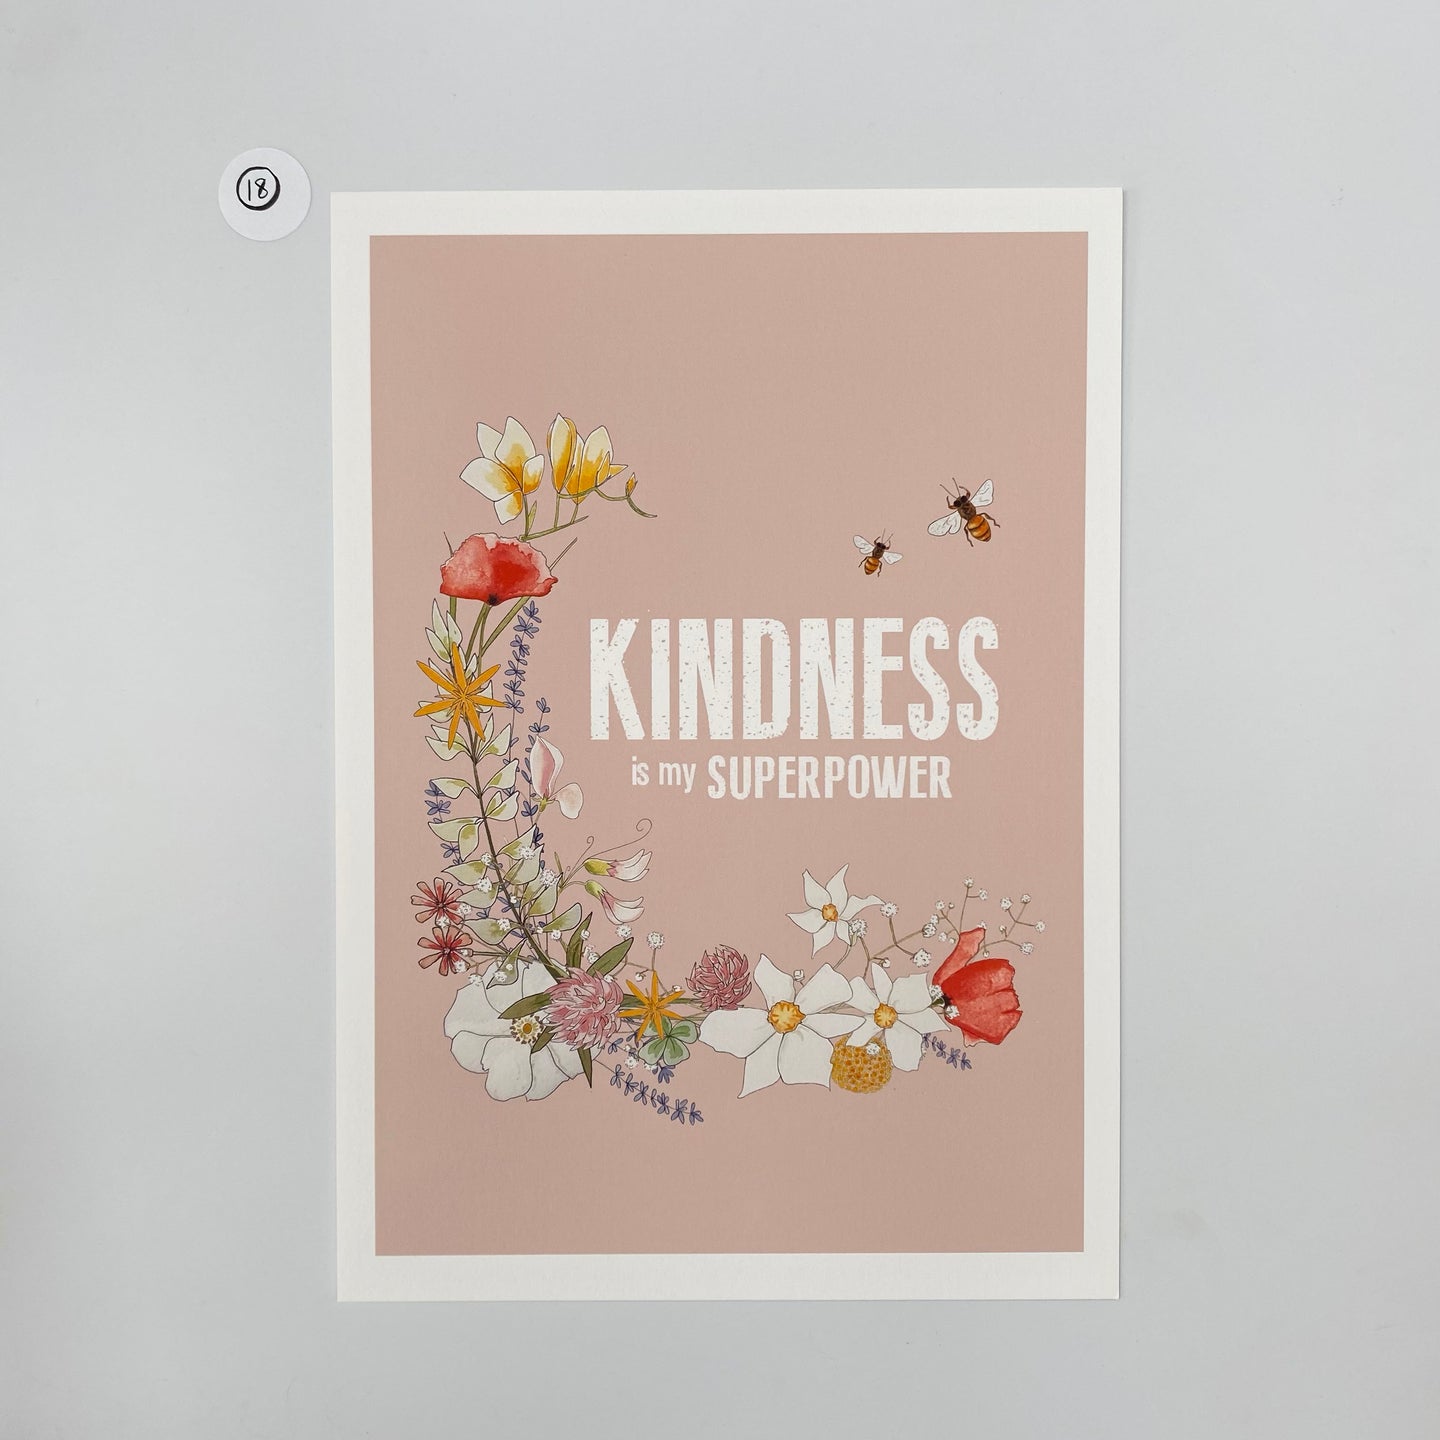 Outlet 18: Kindness is my Superpower